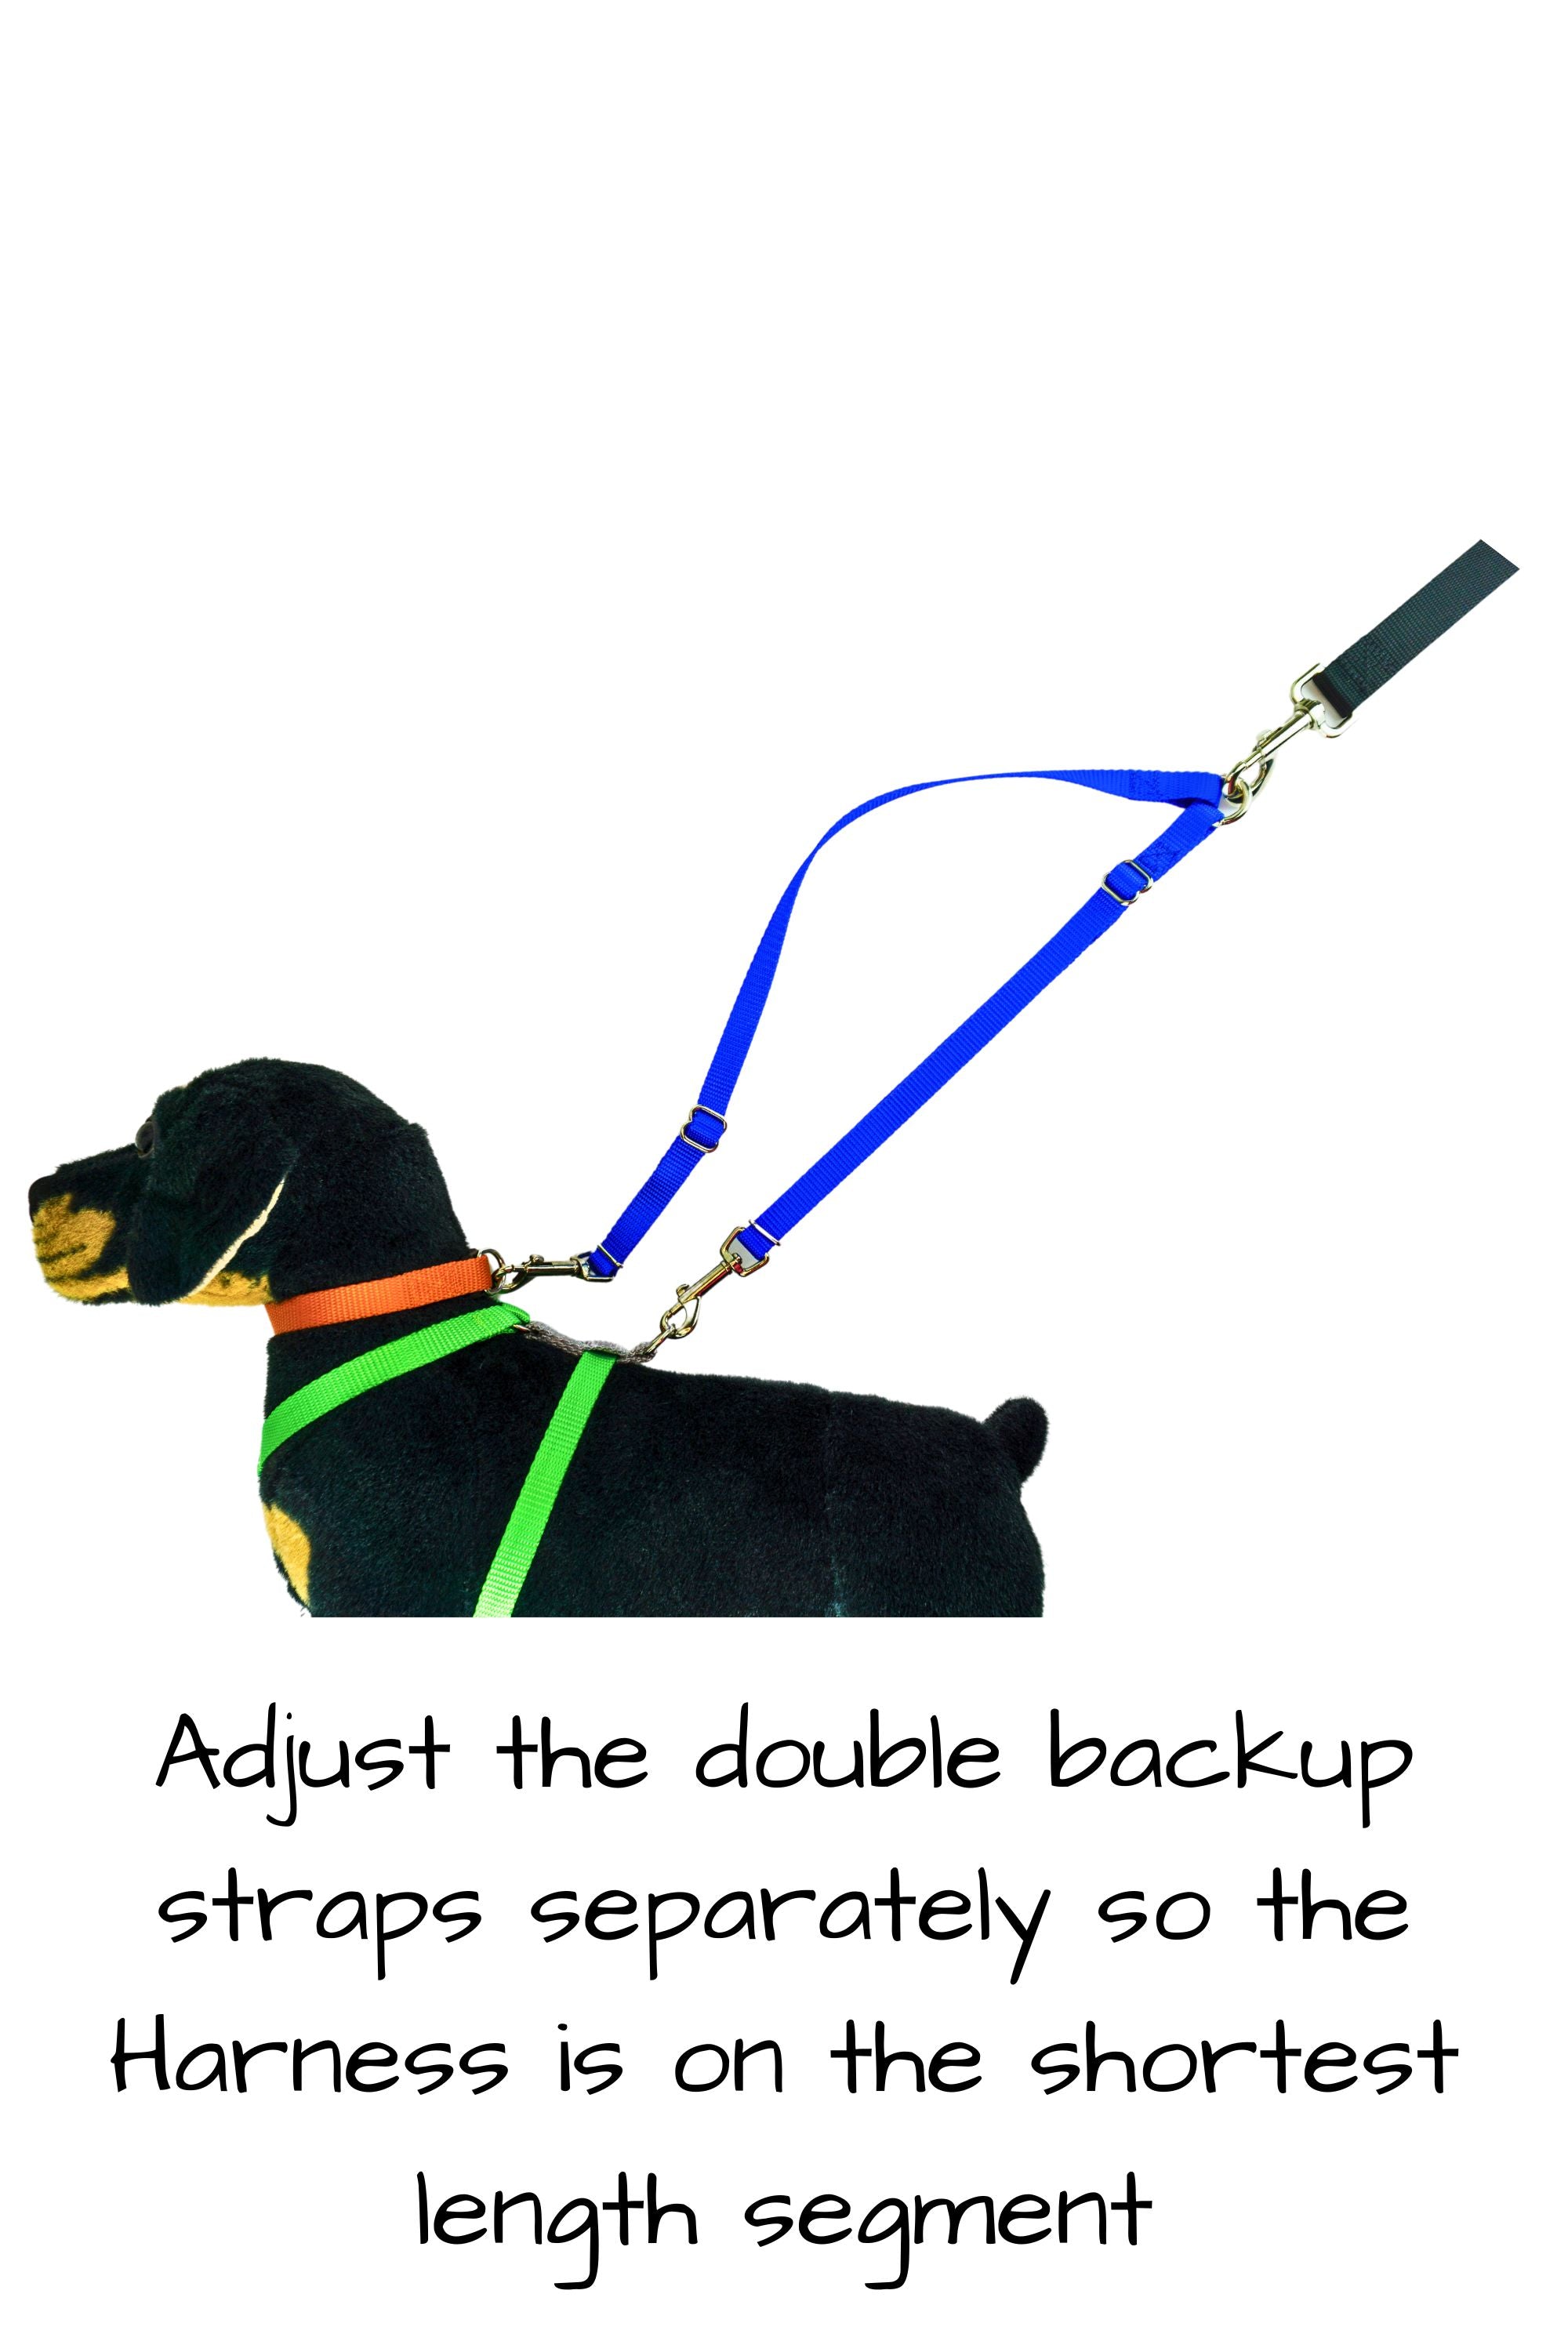 The individual segments of the double backup straps should be adjusted separately so that the harness is on the shortest length segment, and the segment connected to the collar should have some slack.